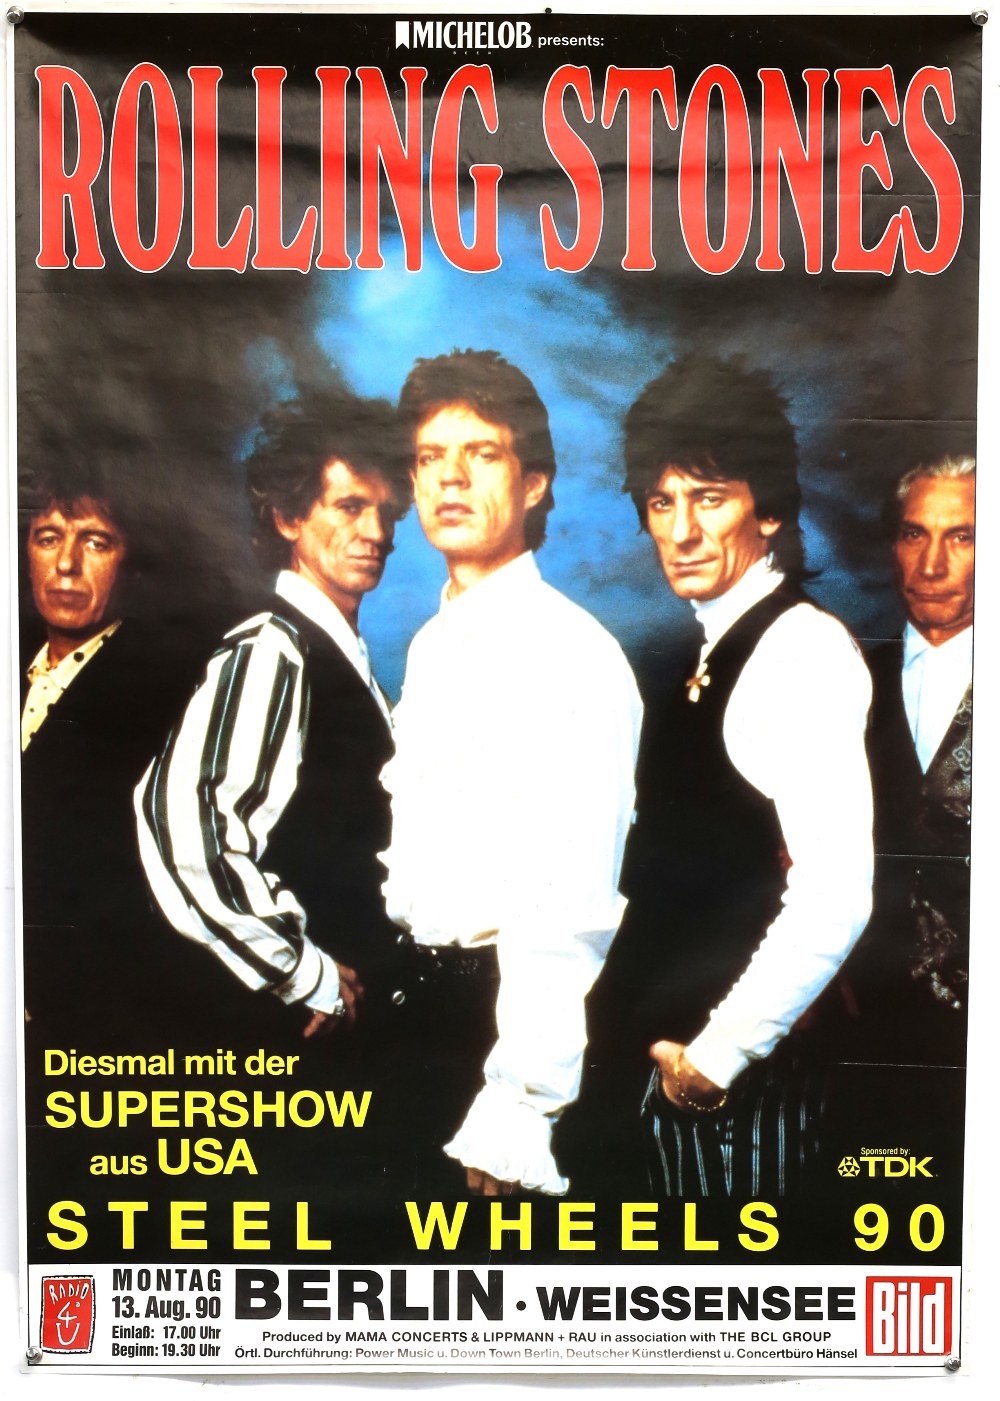 Approx. 50 Music tour and promotional posters including The Rolling Stones Steel Wheels 90, Toto,